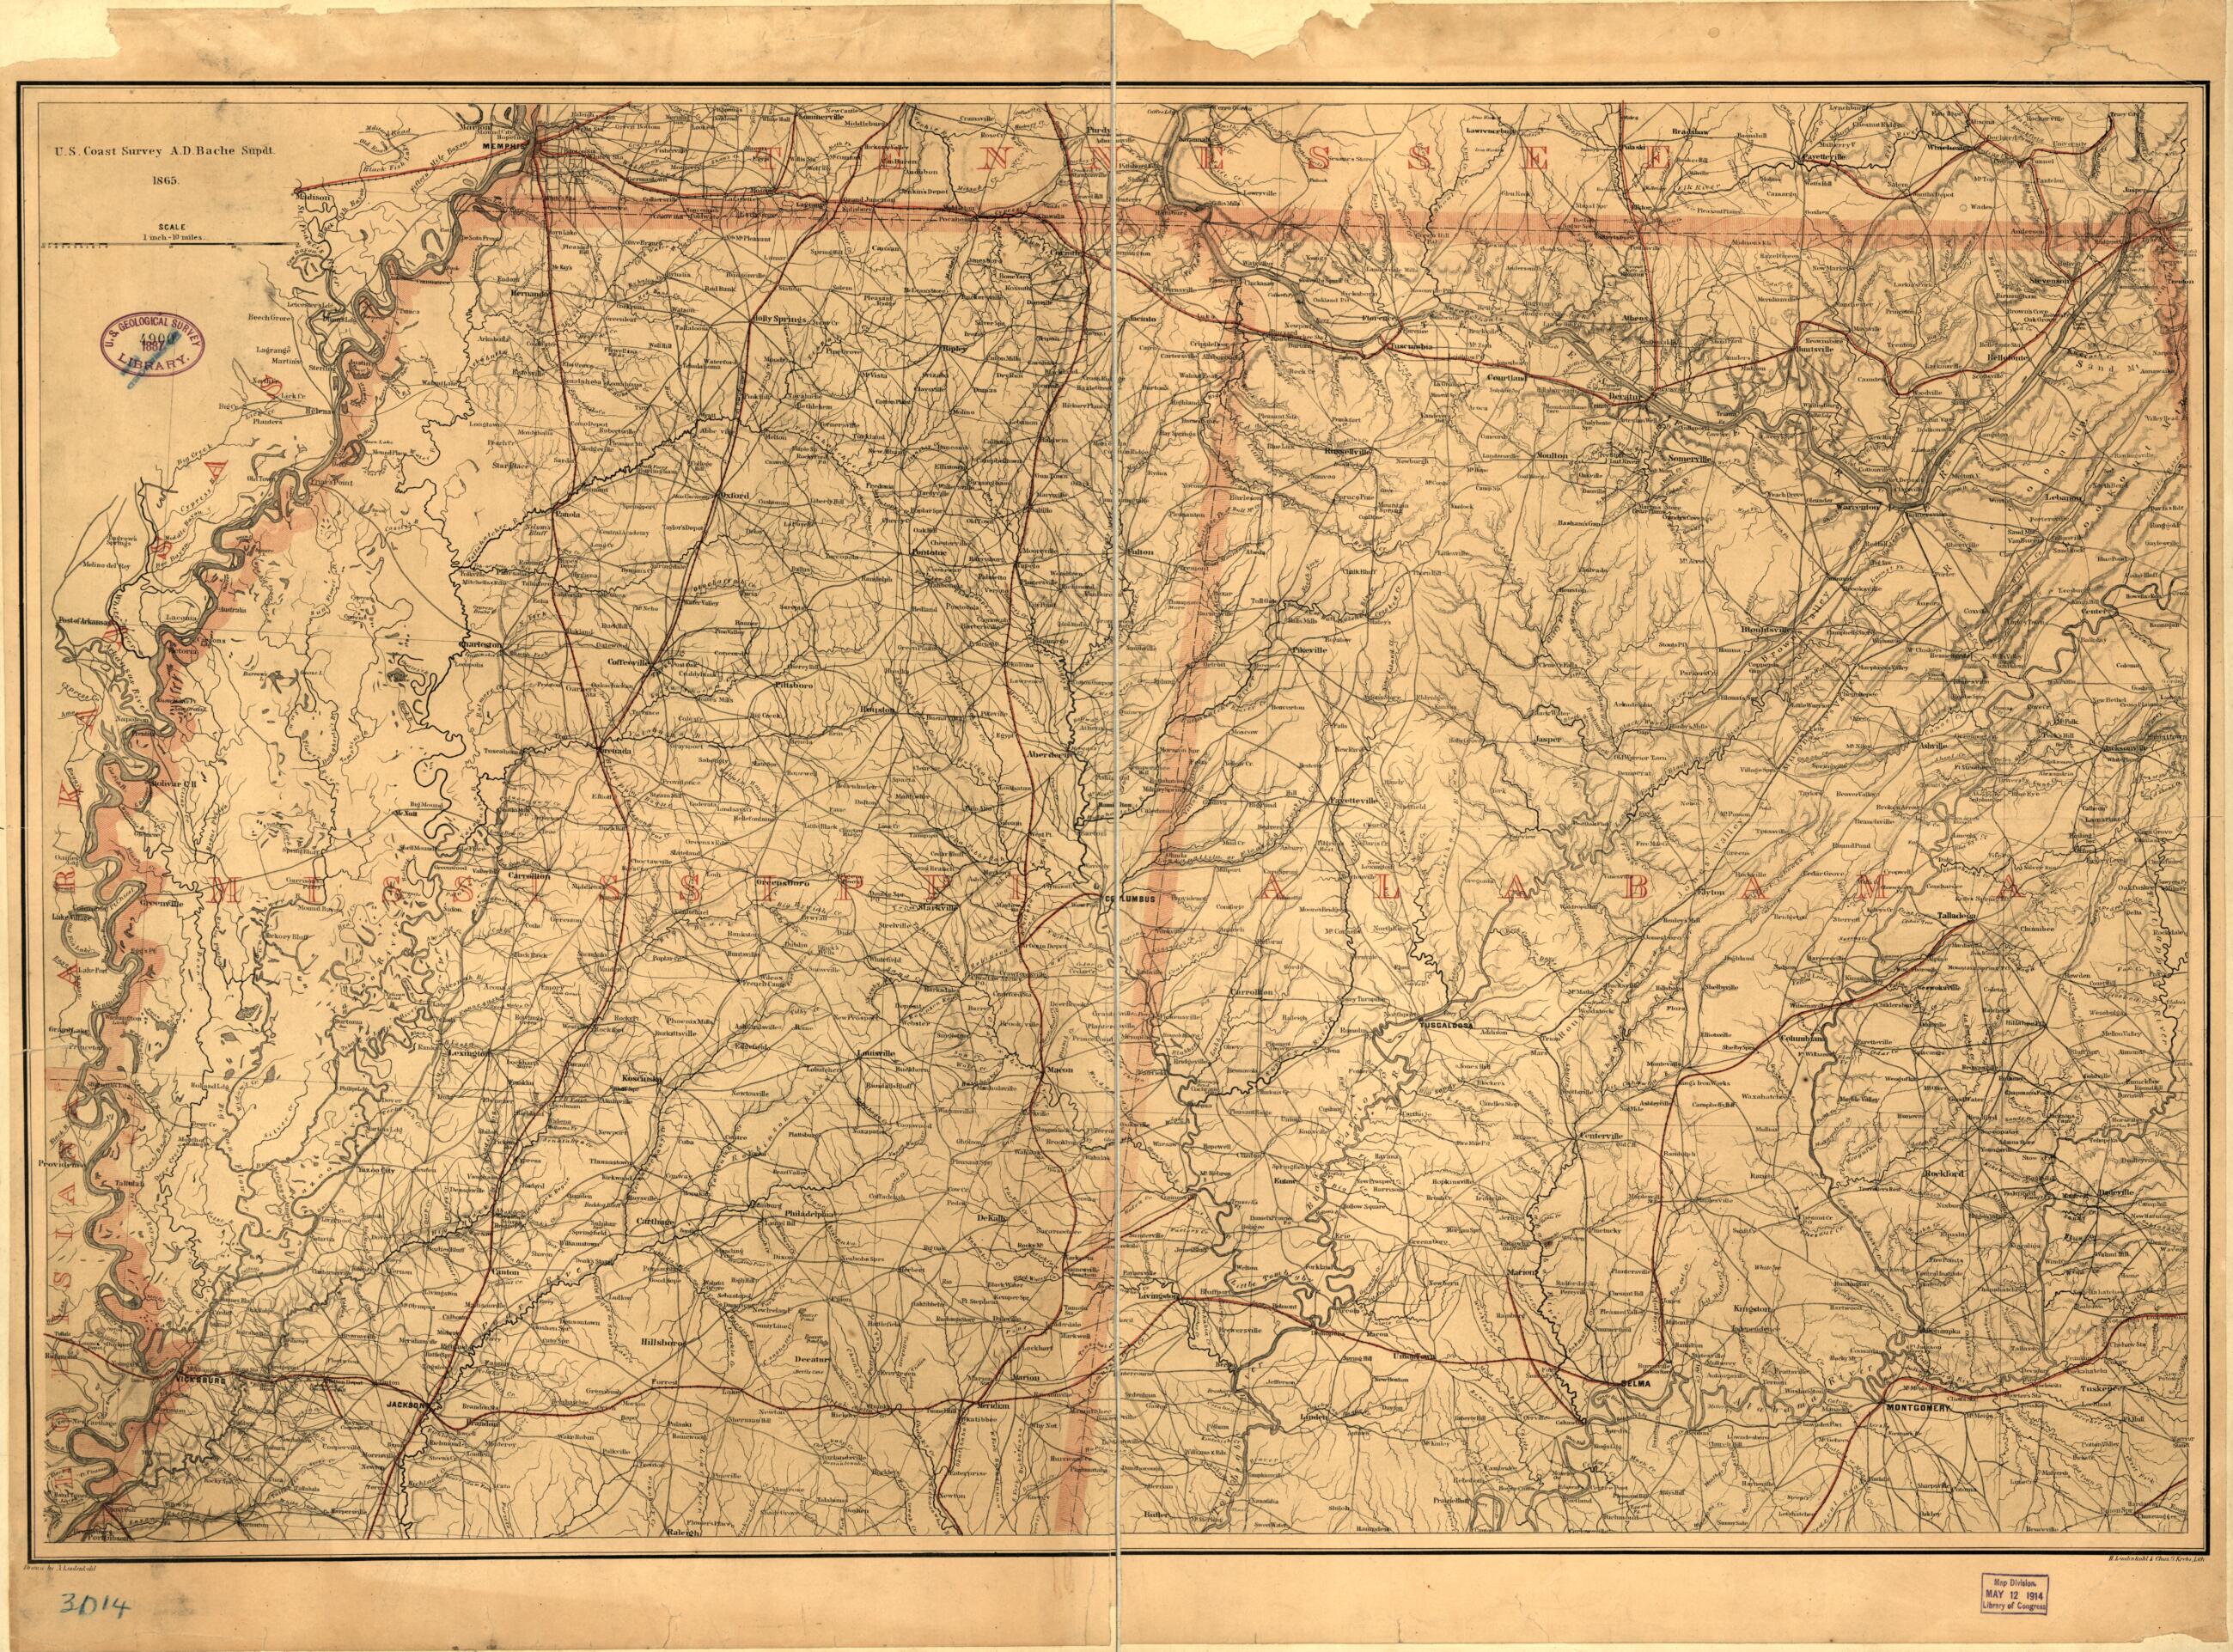 This old map of Northern Mississippi and Alabama from 1865 was created by A. Lindenkohl,  United States Coast Survey in 1865